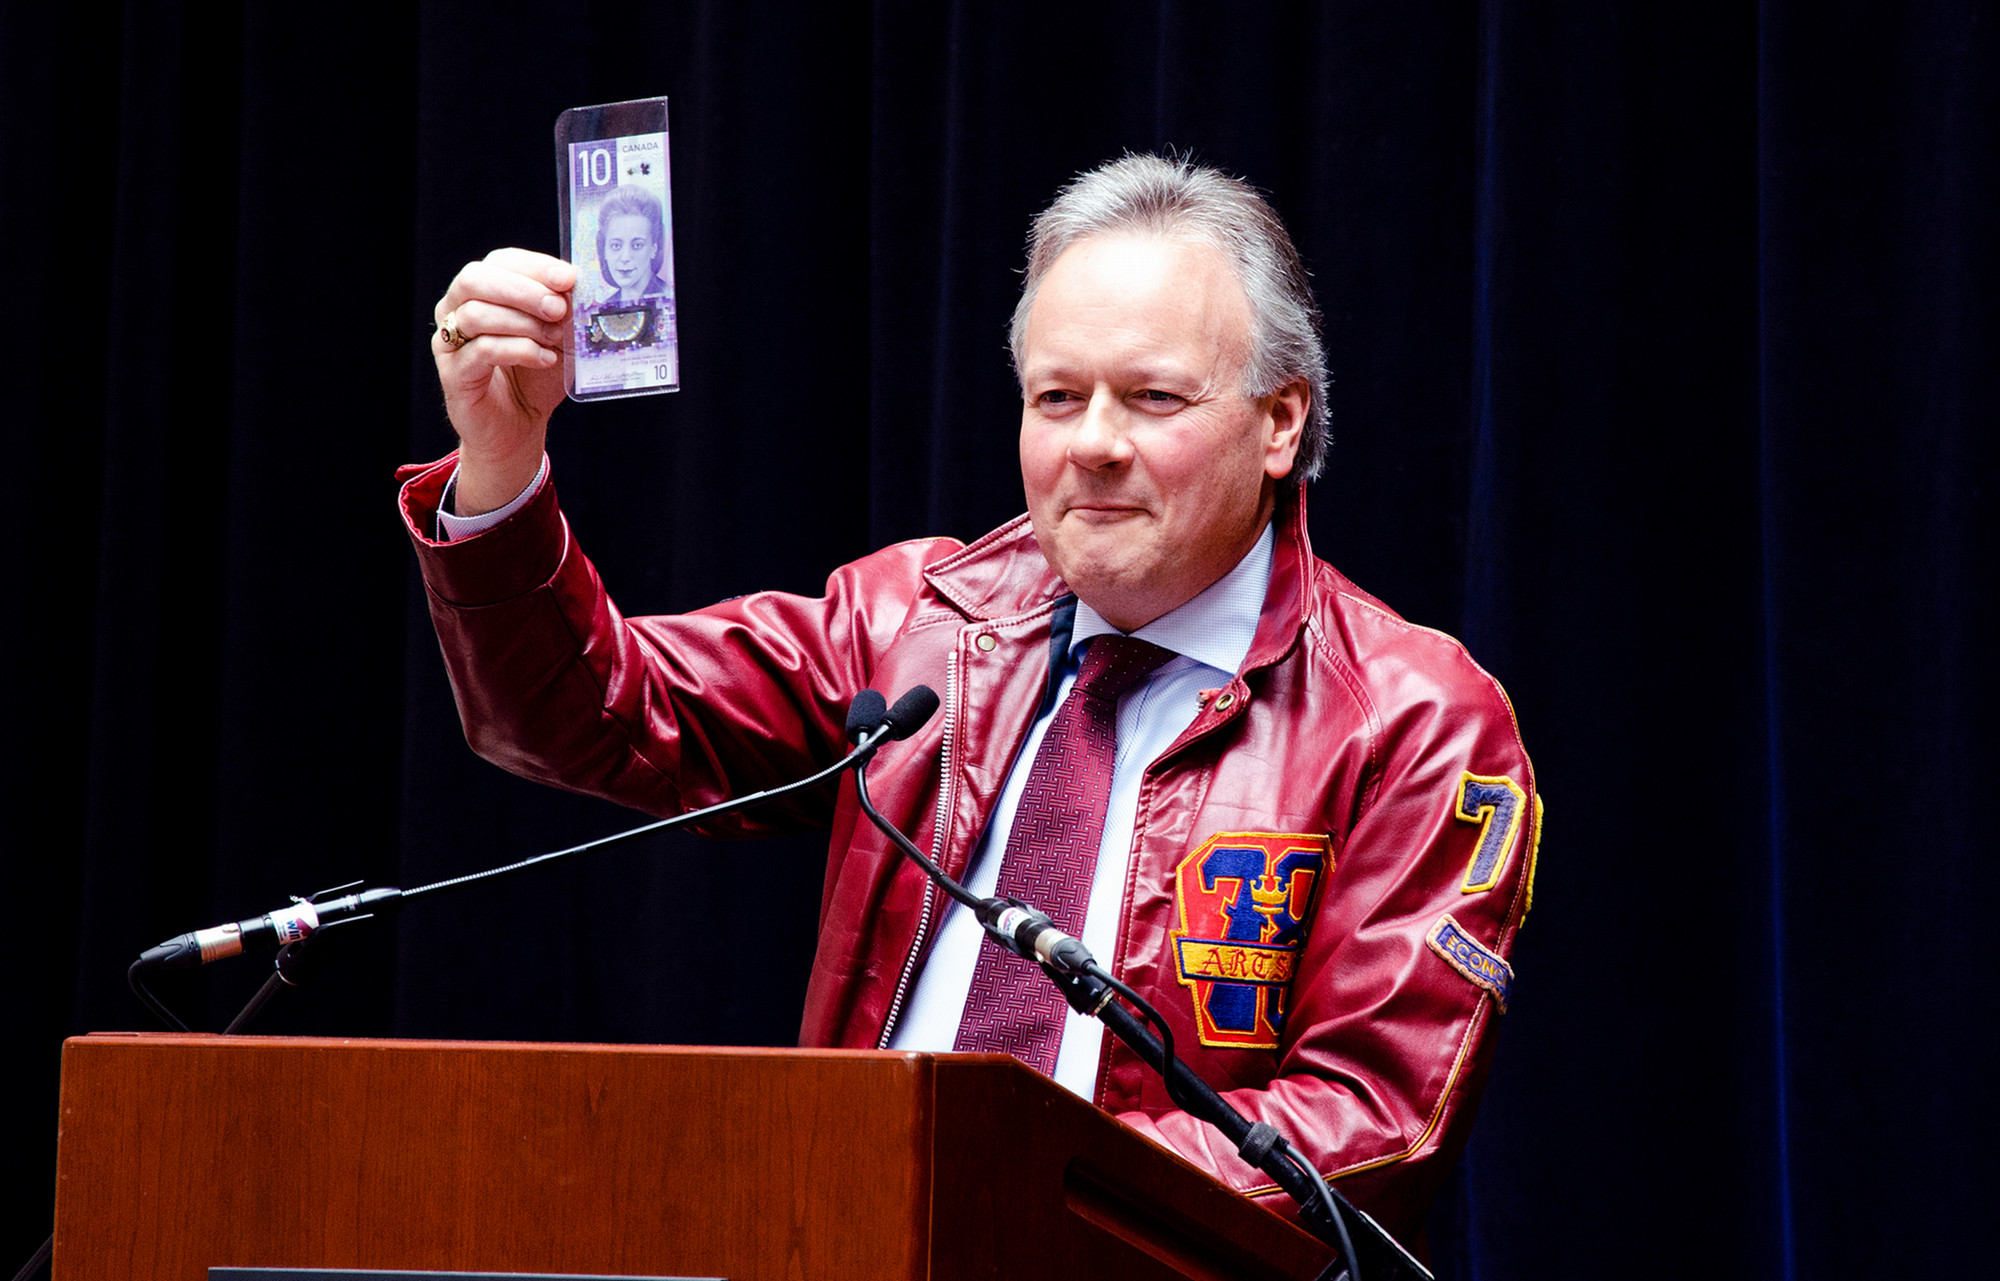 Stephen Poloz, at Goodes Hall in March, shows off the then just-released new version of the $10 bill. He’s wearing the Queen’s jacket he got for Christmas in 1974.